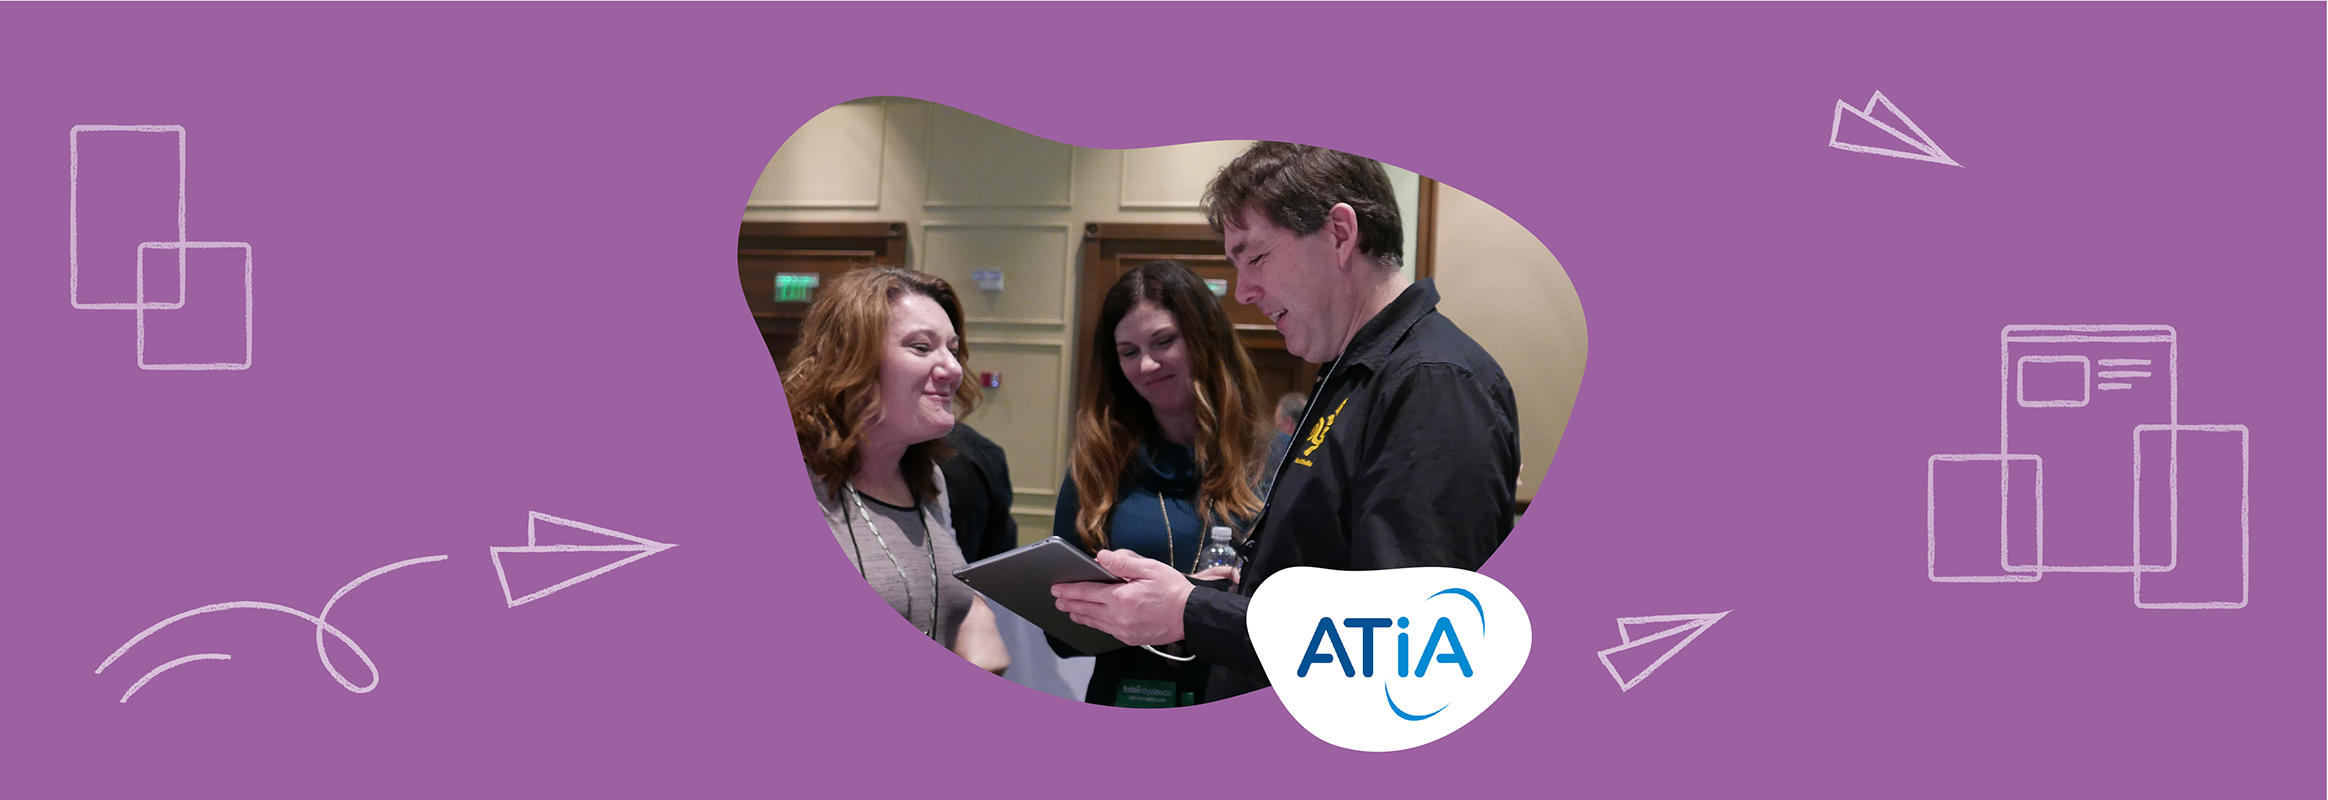 3 people talking at the ATIA conference talking to each other. The visual is set on a purple background and ATIA's logo in the middle.